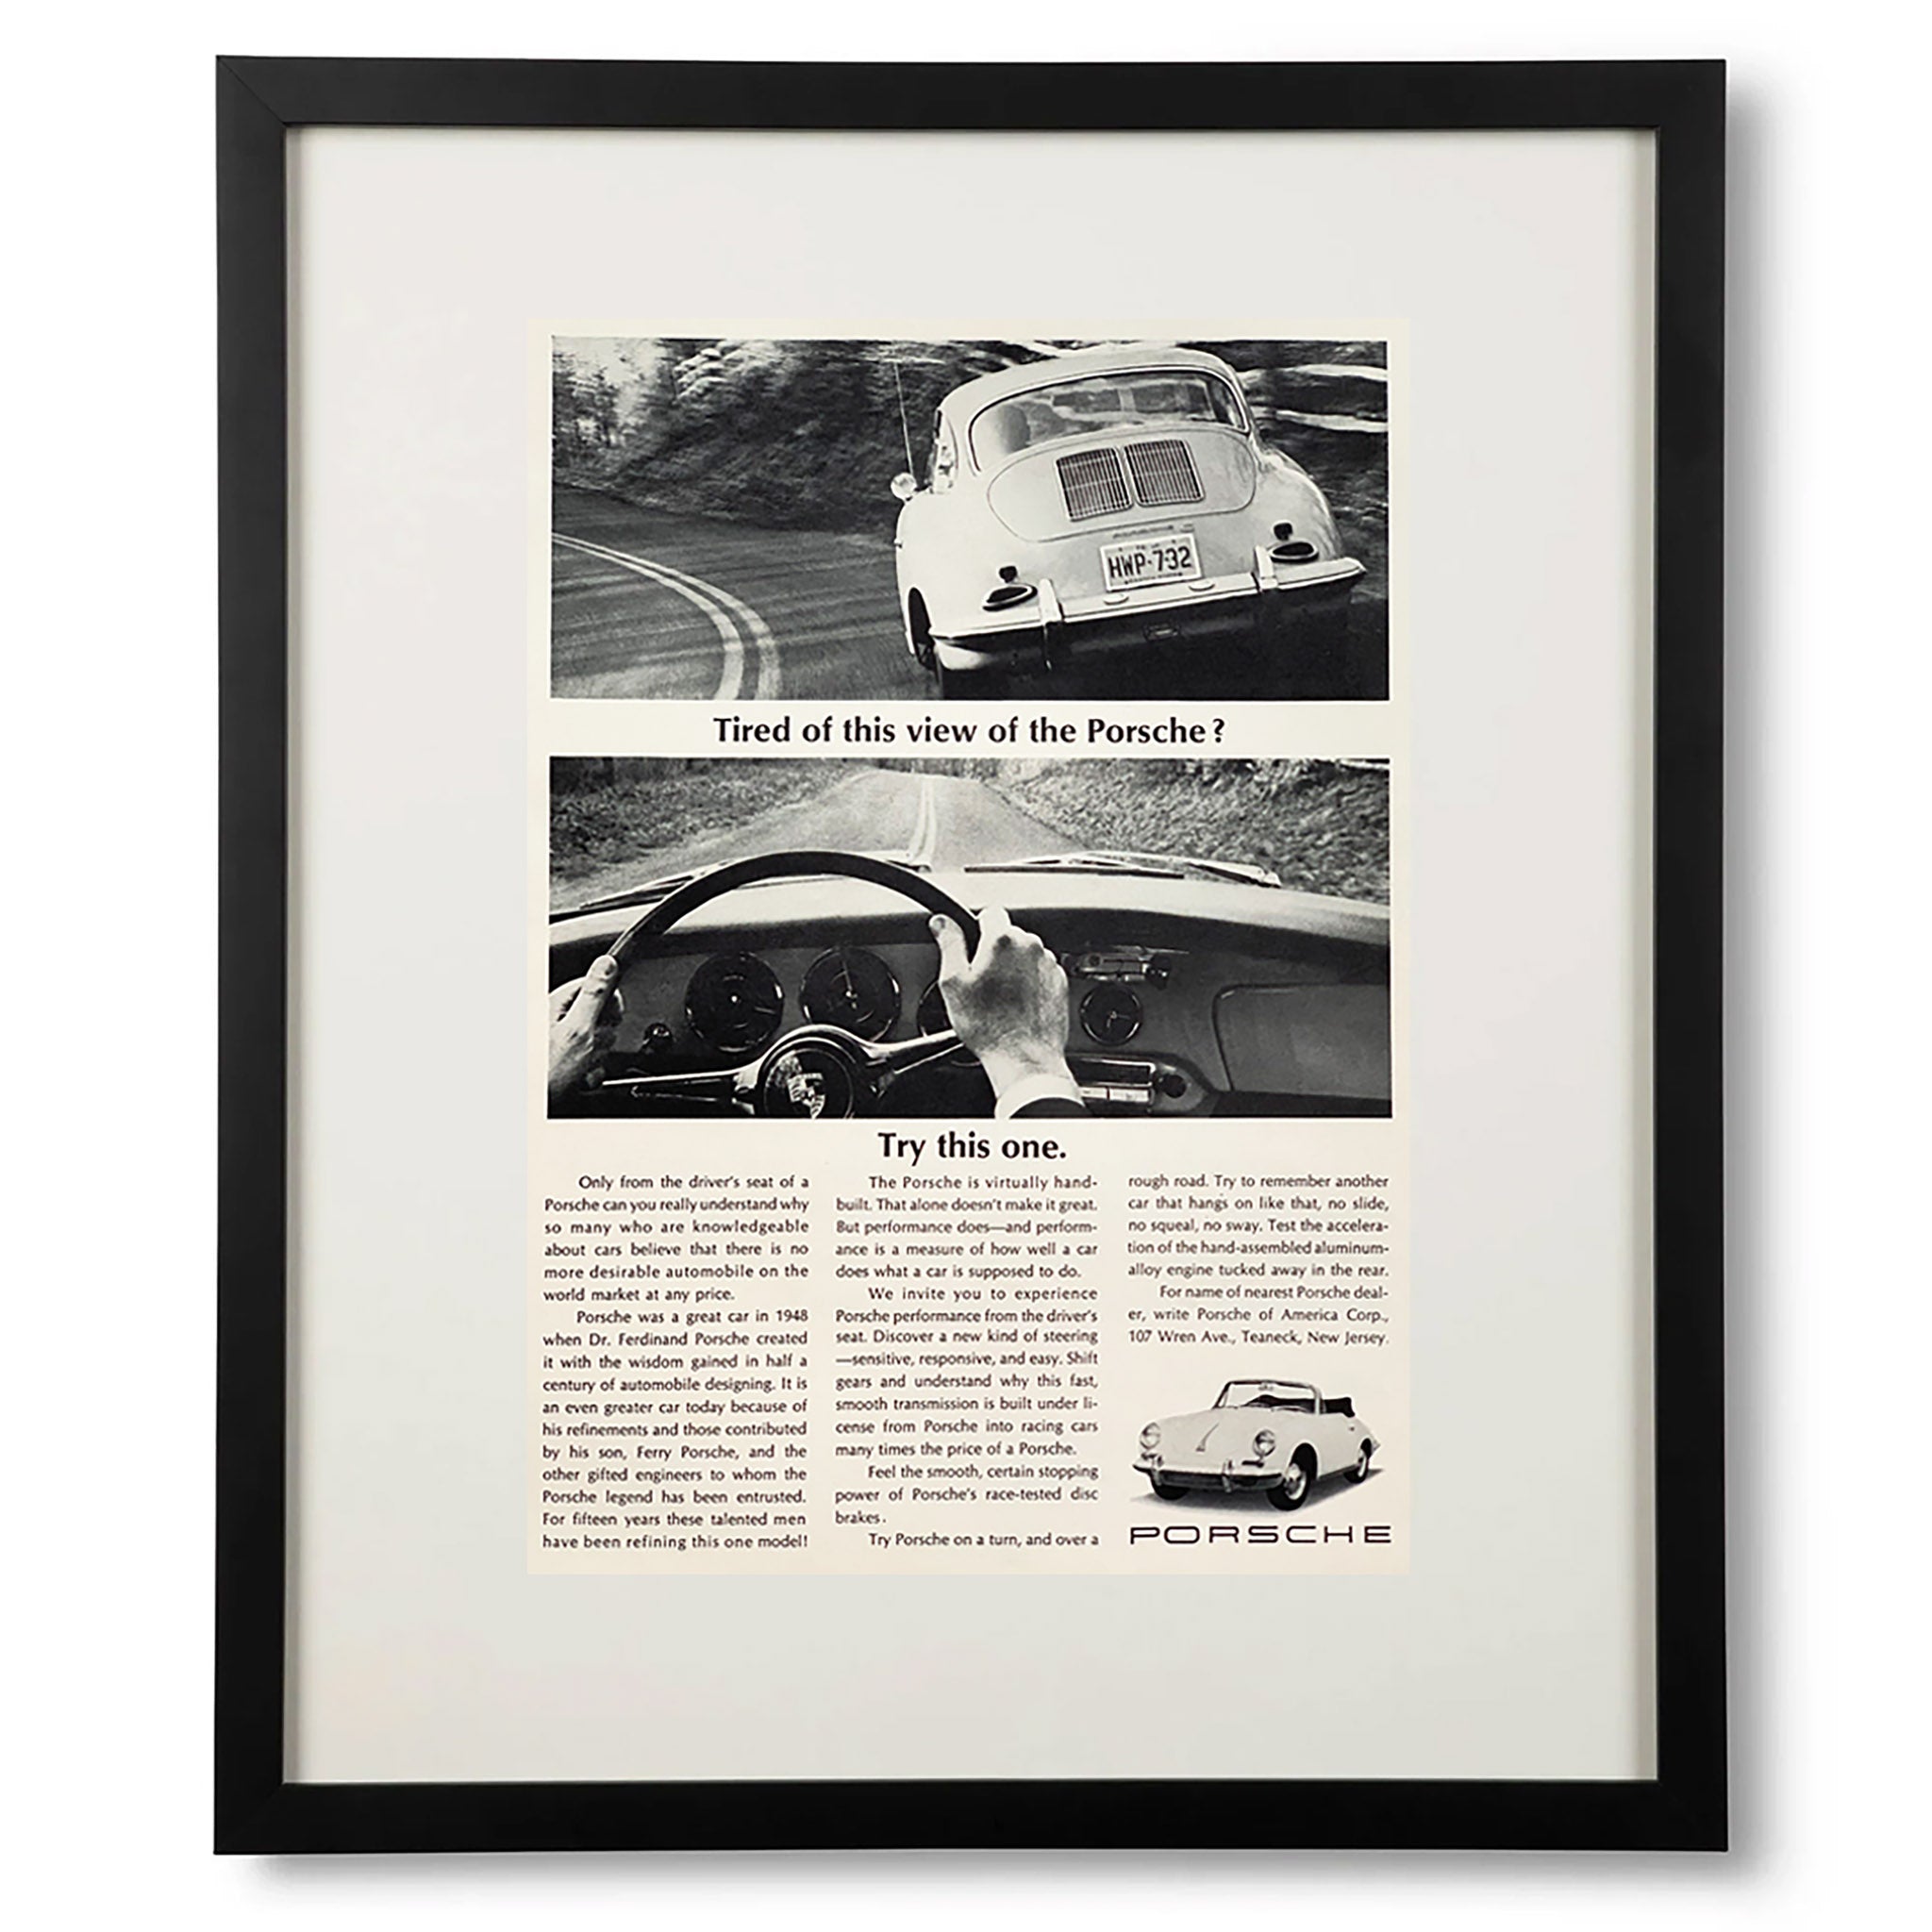 Framed Porsche Tired of this View? Framed Advertisement